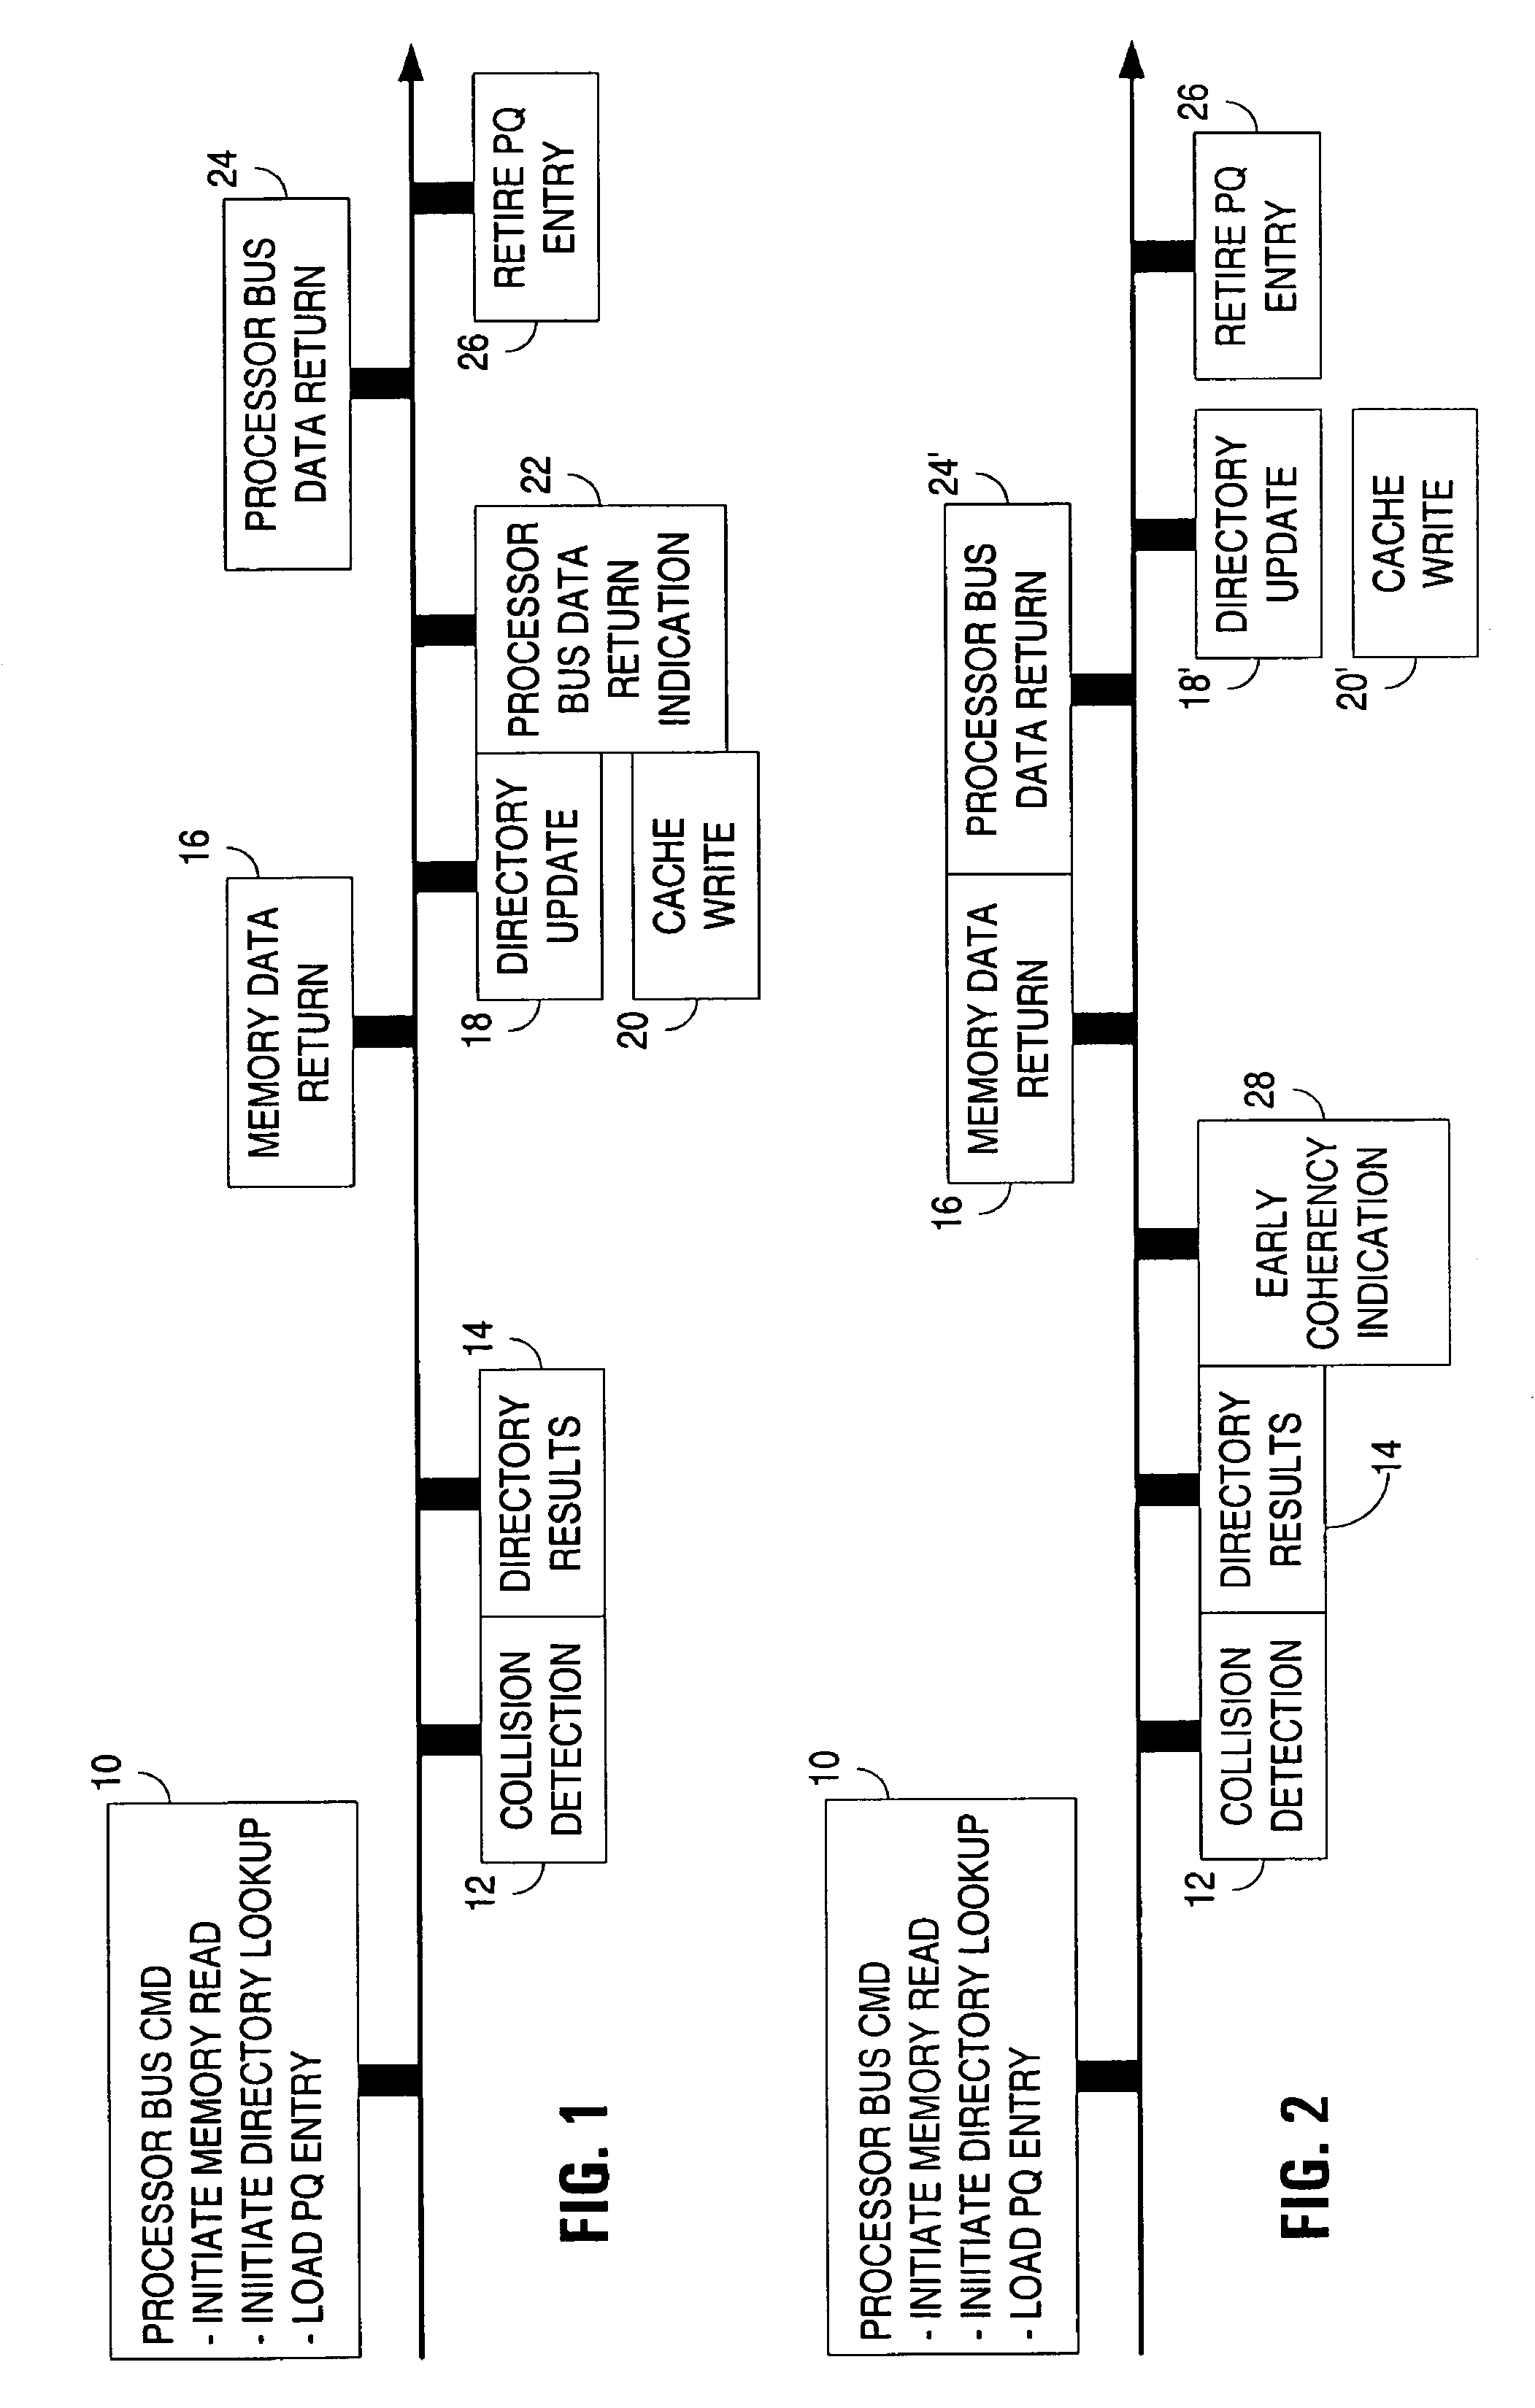 Early coherency indication for return data in shared memory architecture